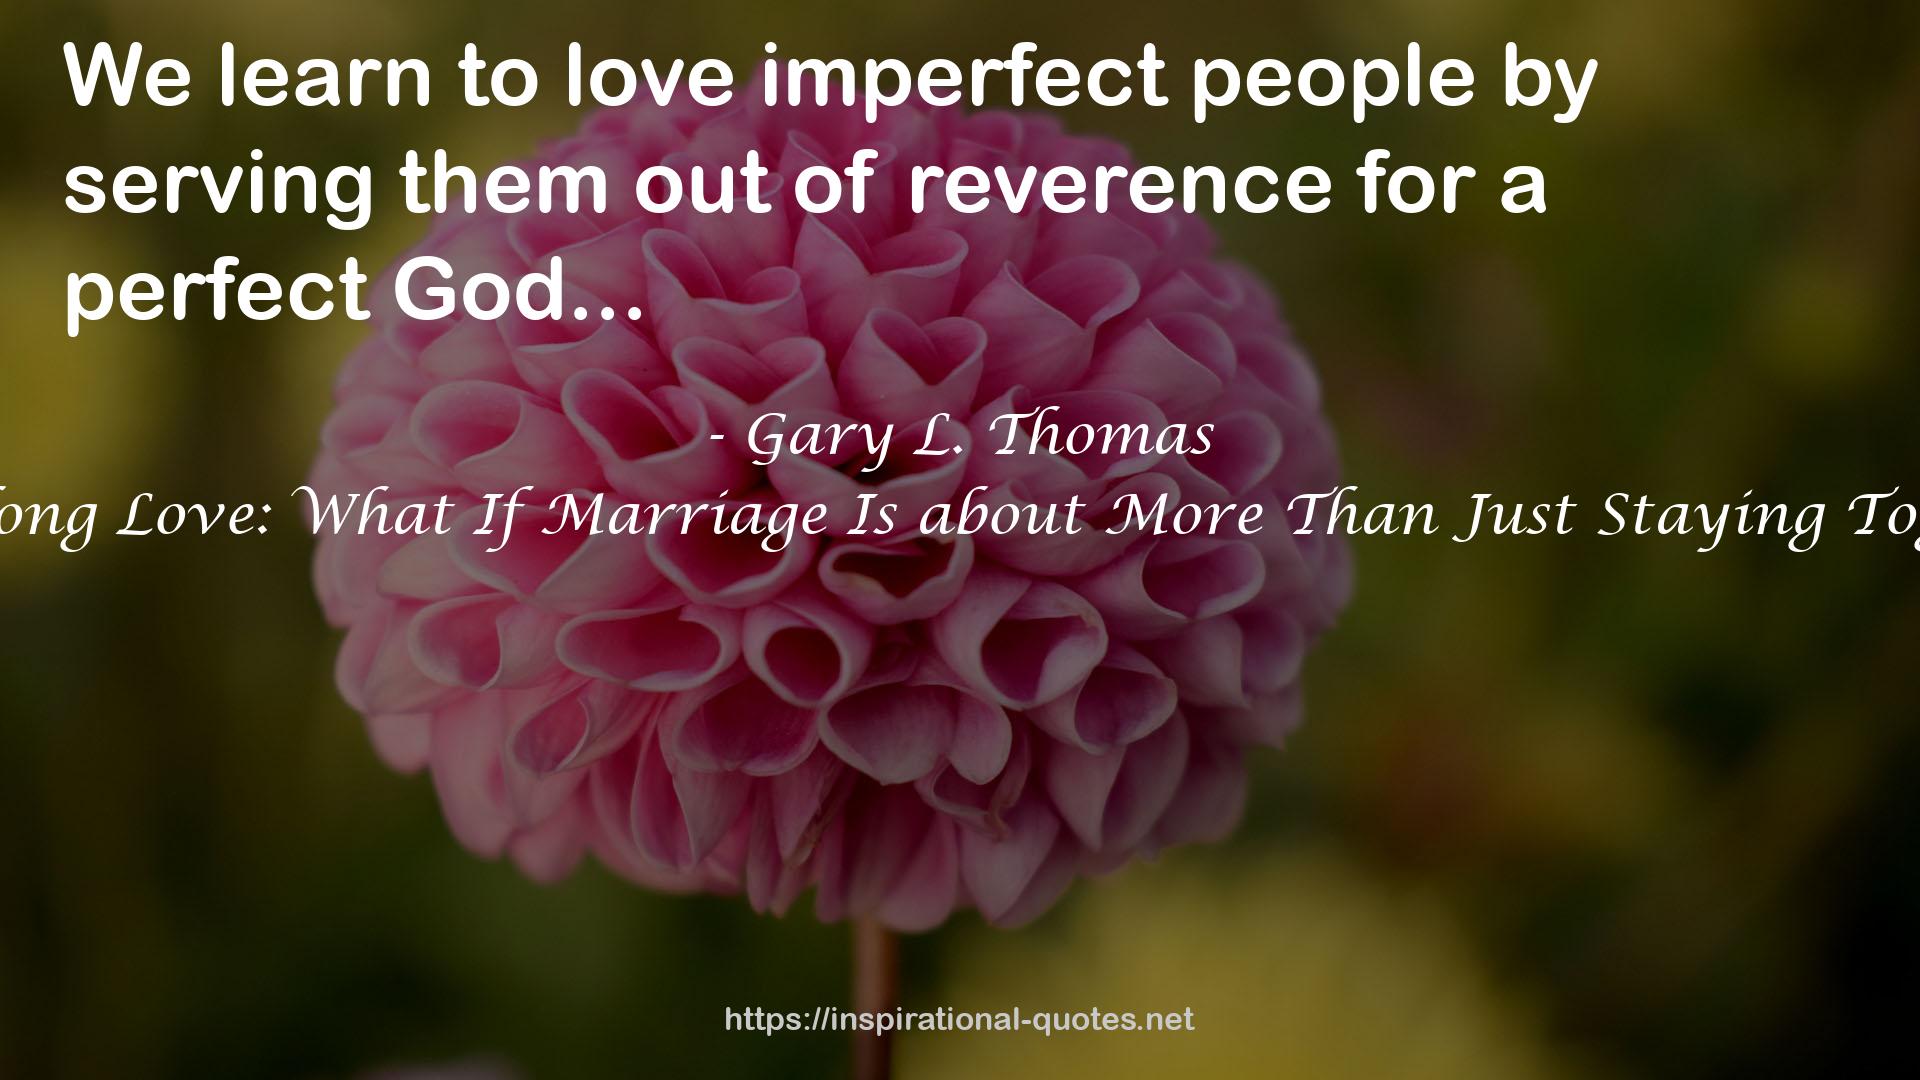 A Lifelong Love: What If Marriage Is about More Than Just Staying Together? QUOTES